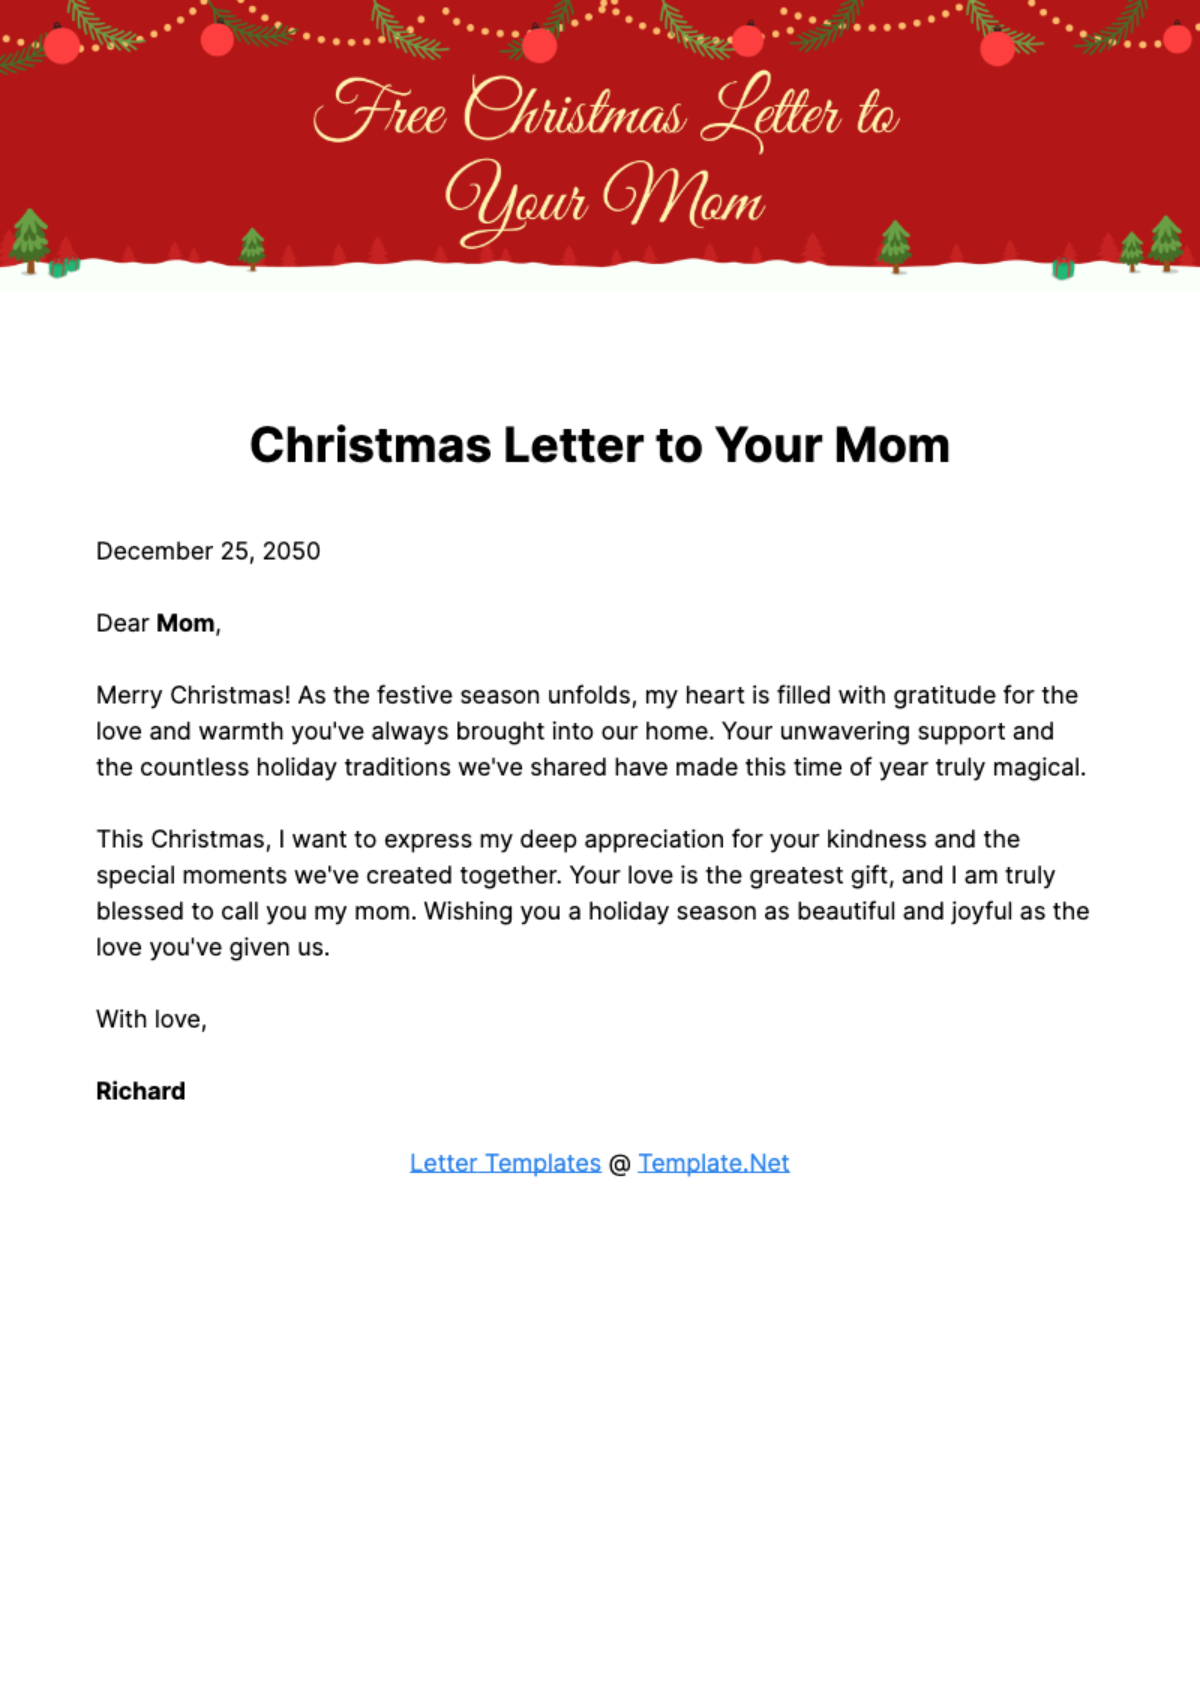 Christmas Letter to Your Mom Template